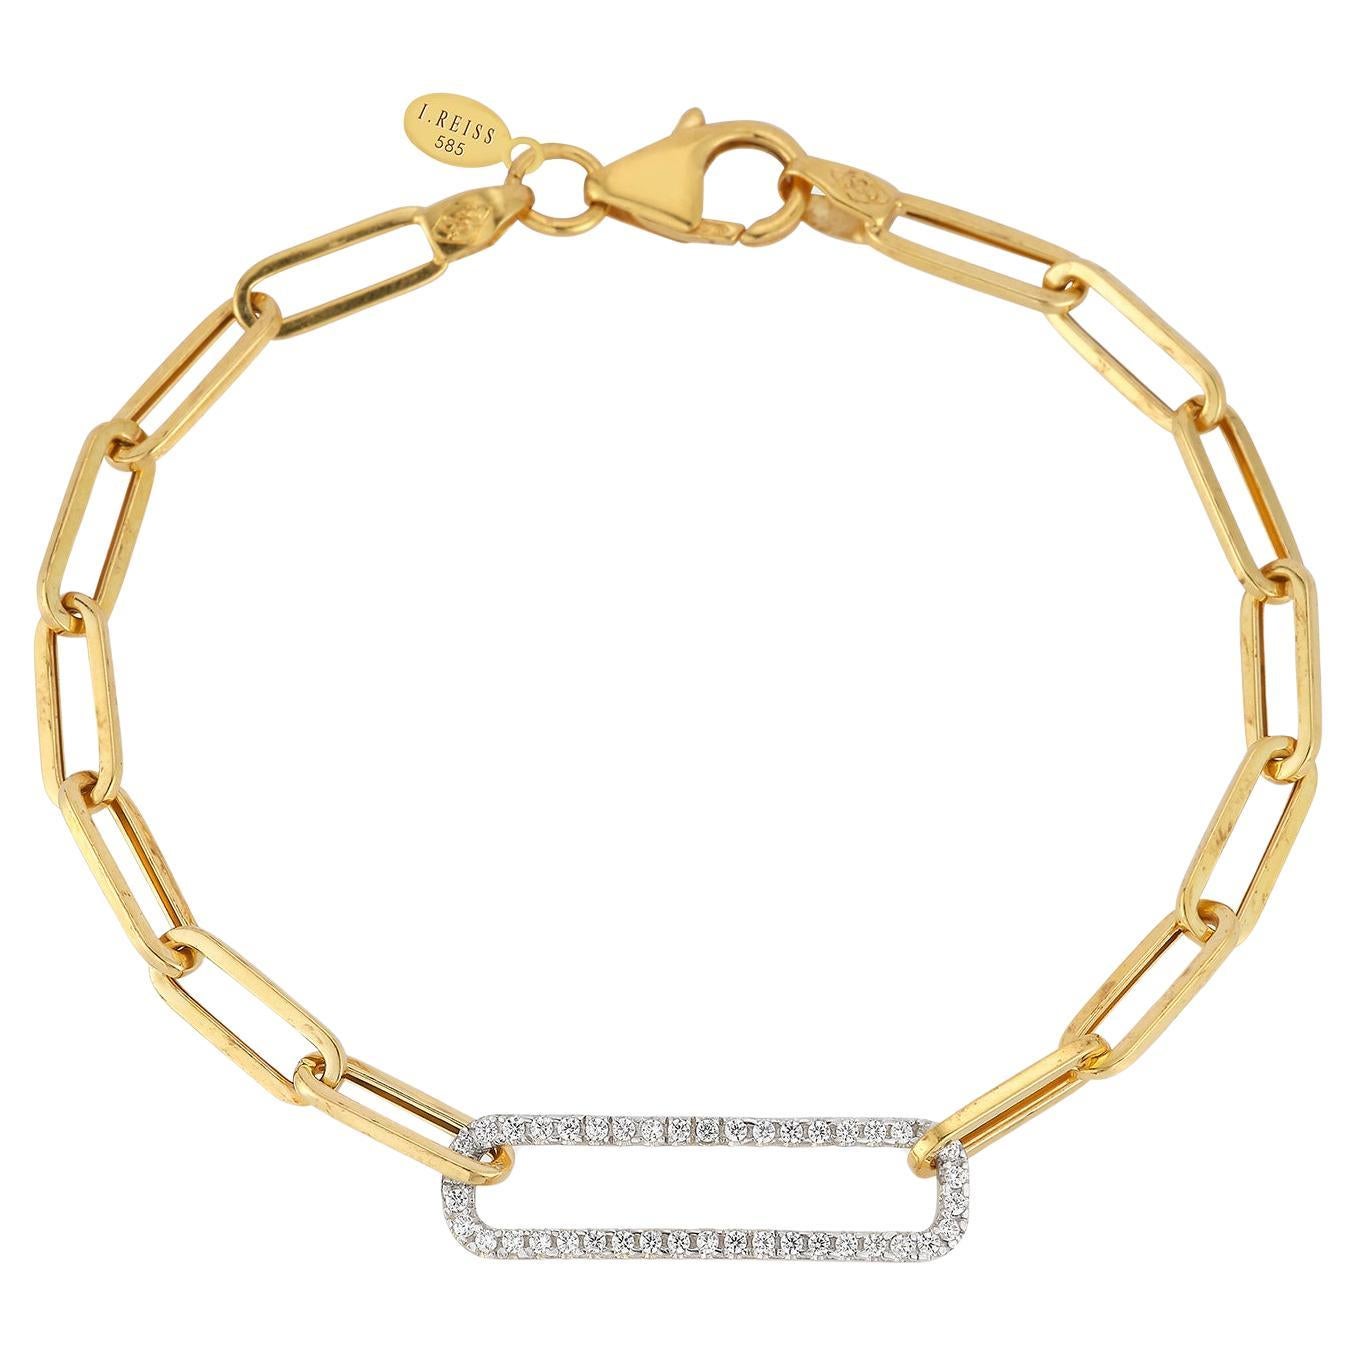 Hand-Crafted 14K Gold 0.25 ct. tw. Open Link Bracelet For Sale